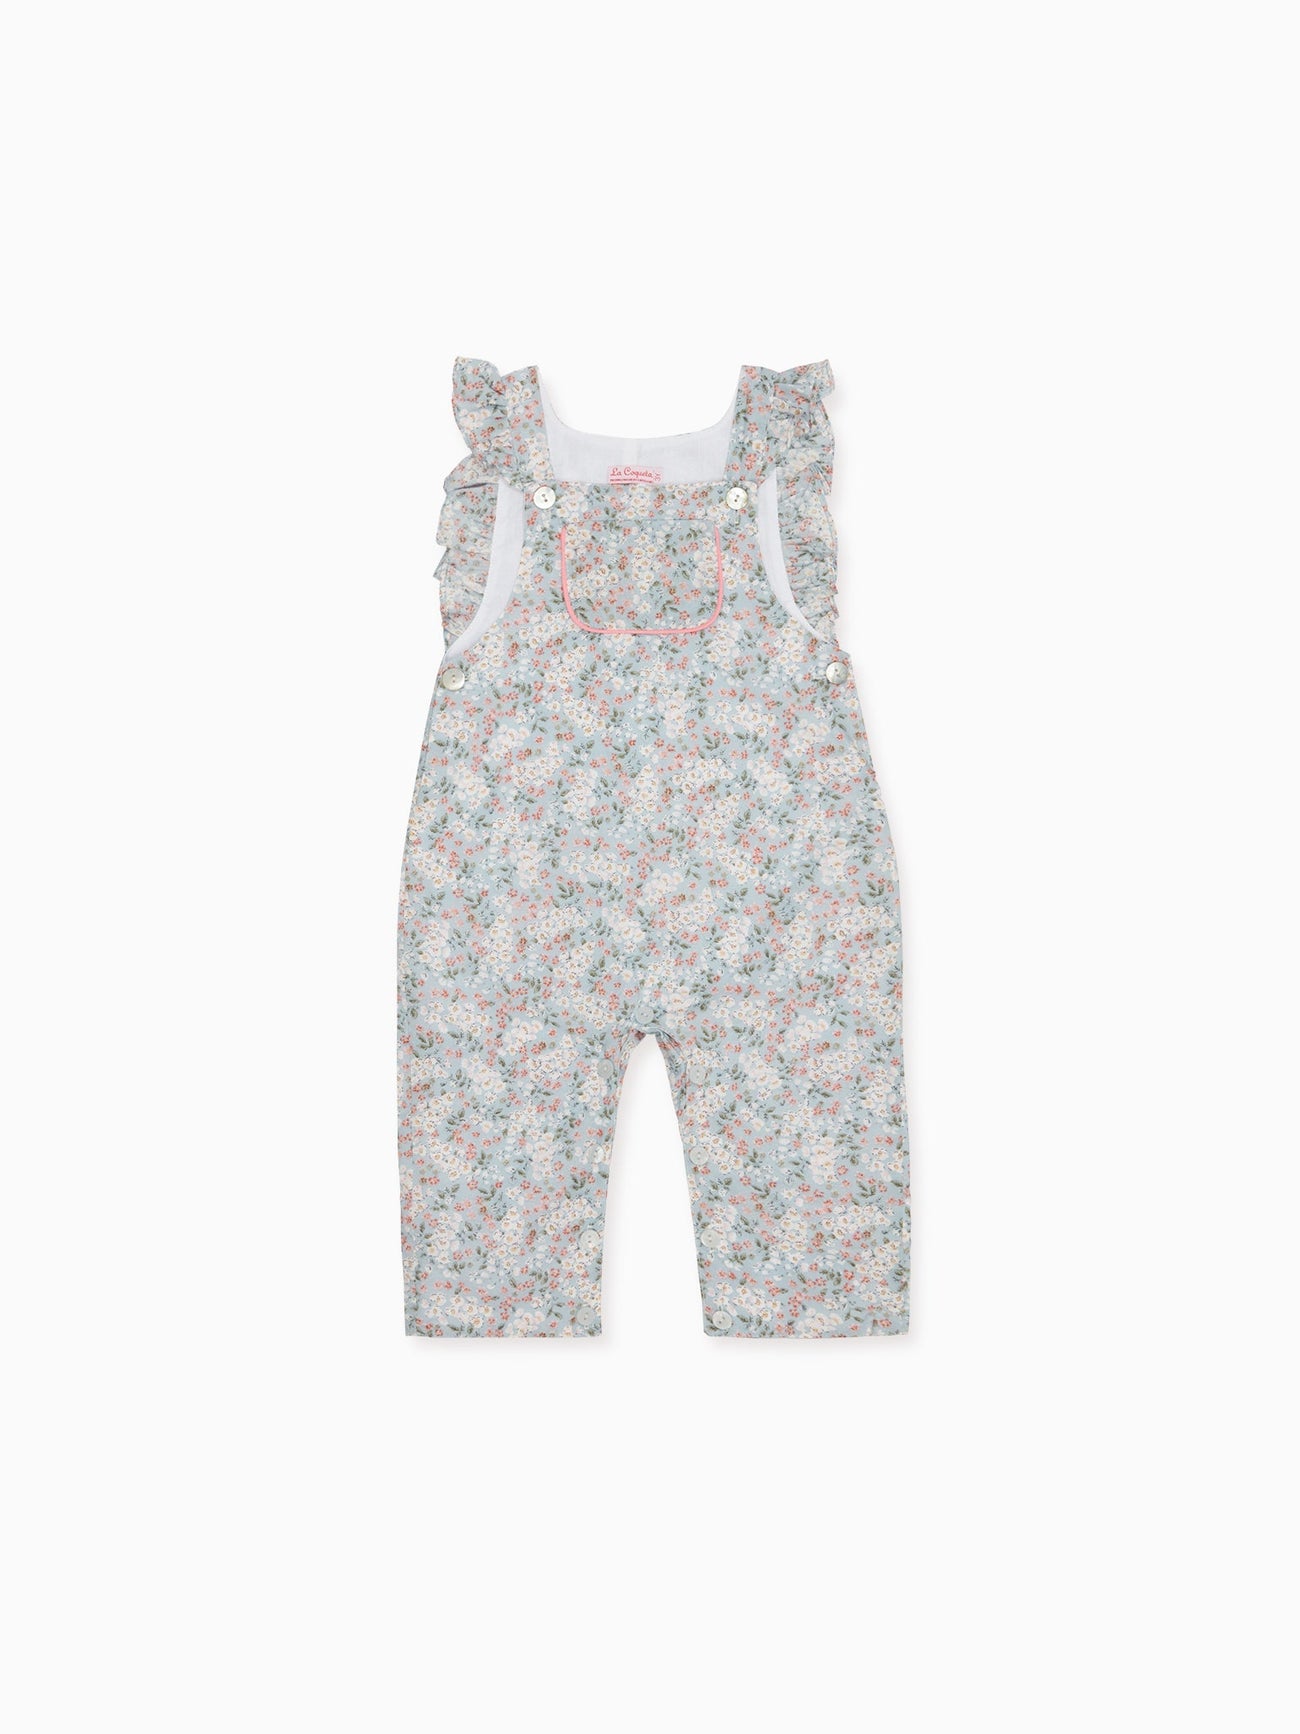 Buy Navy Blue Dungarees &Playsuits for Girls by Peppermint Online